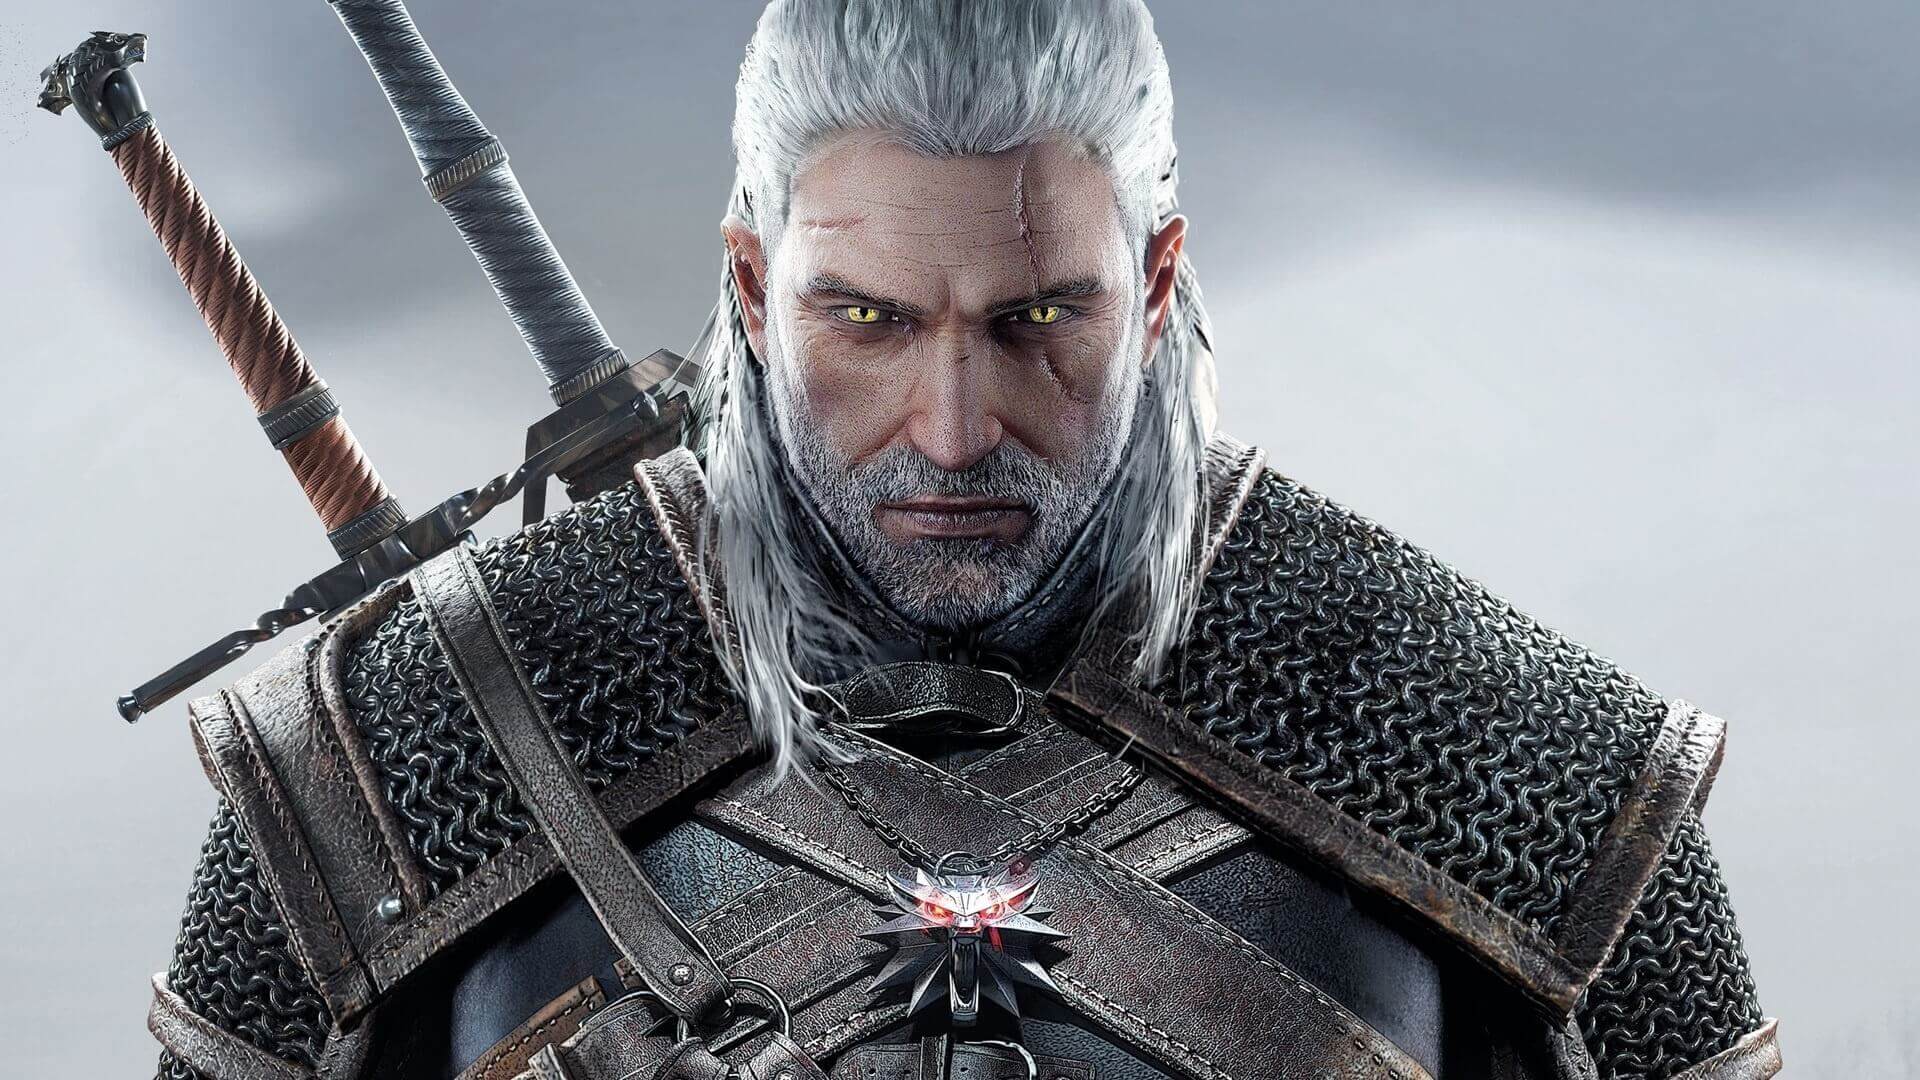 New Witcher game with multiplayer is coming – Here's what we know about Project "Sirius" so far